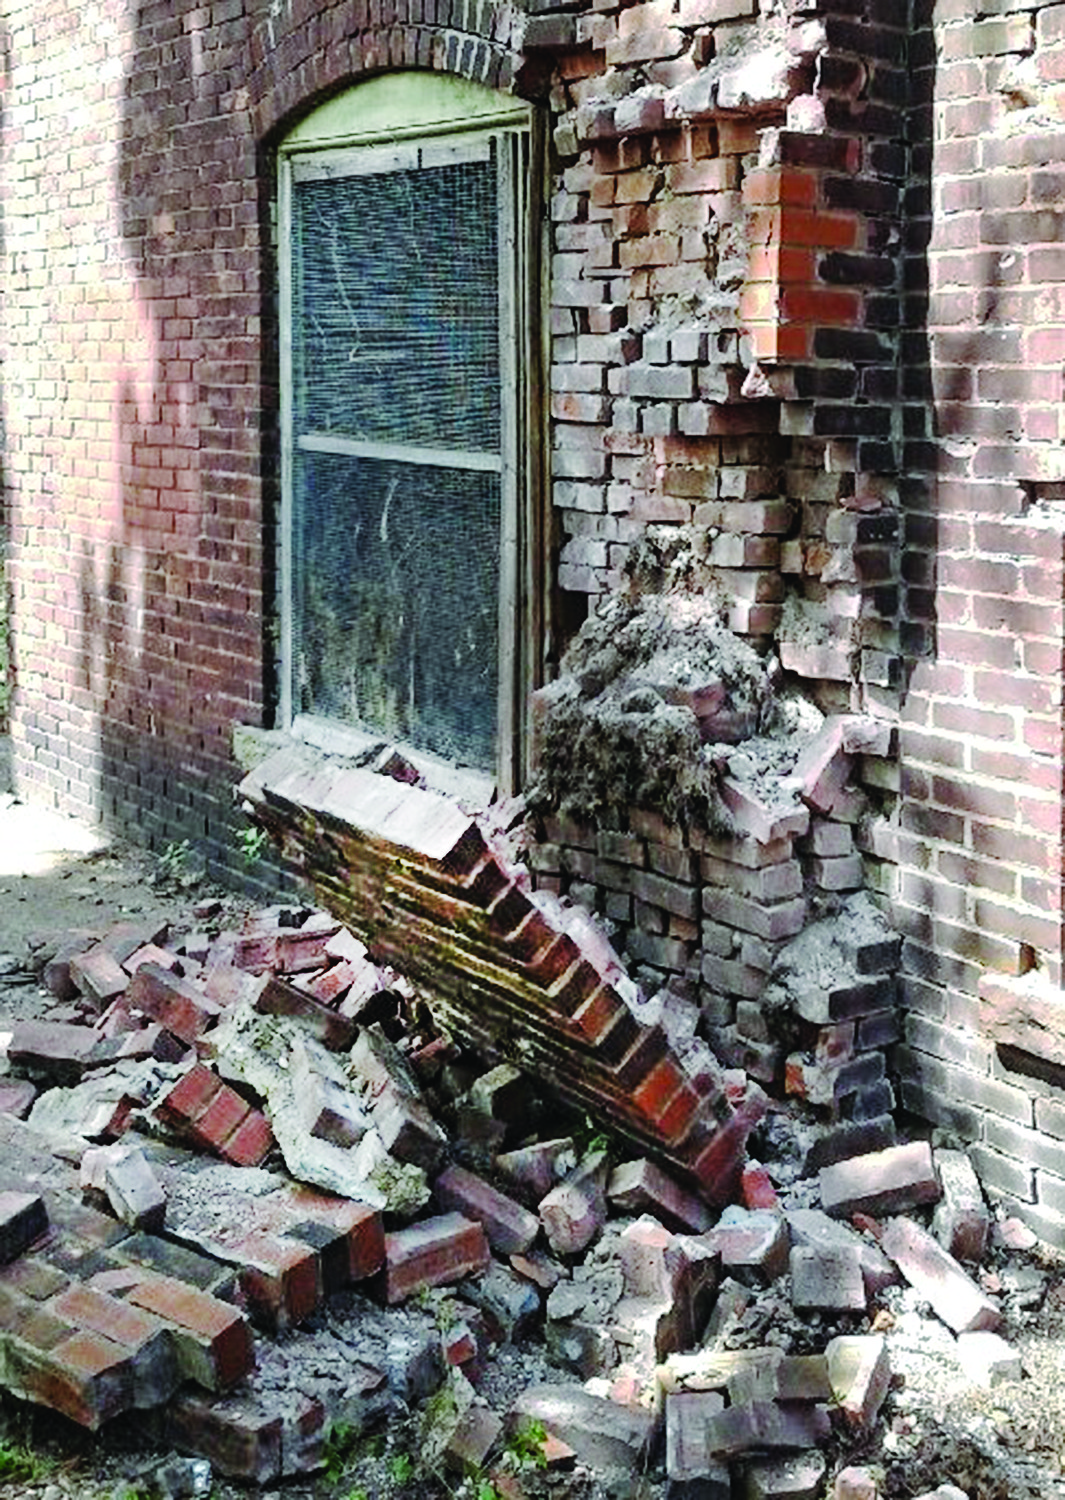 Before: The section of toppled brick on the side rear 
of the building.